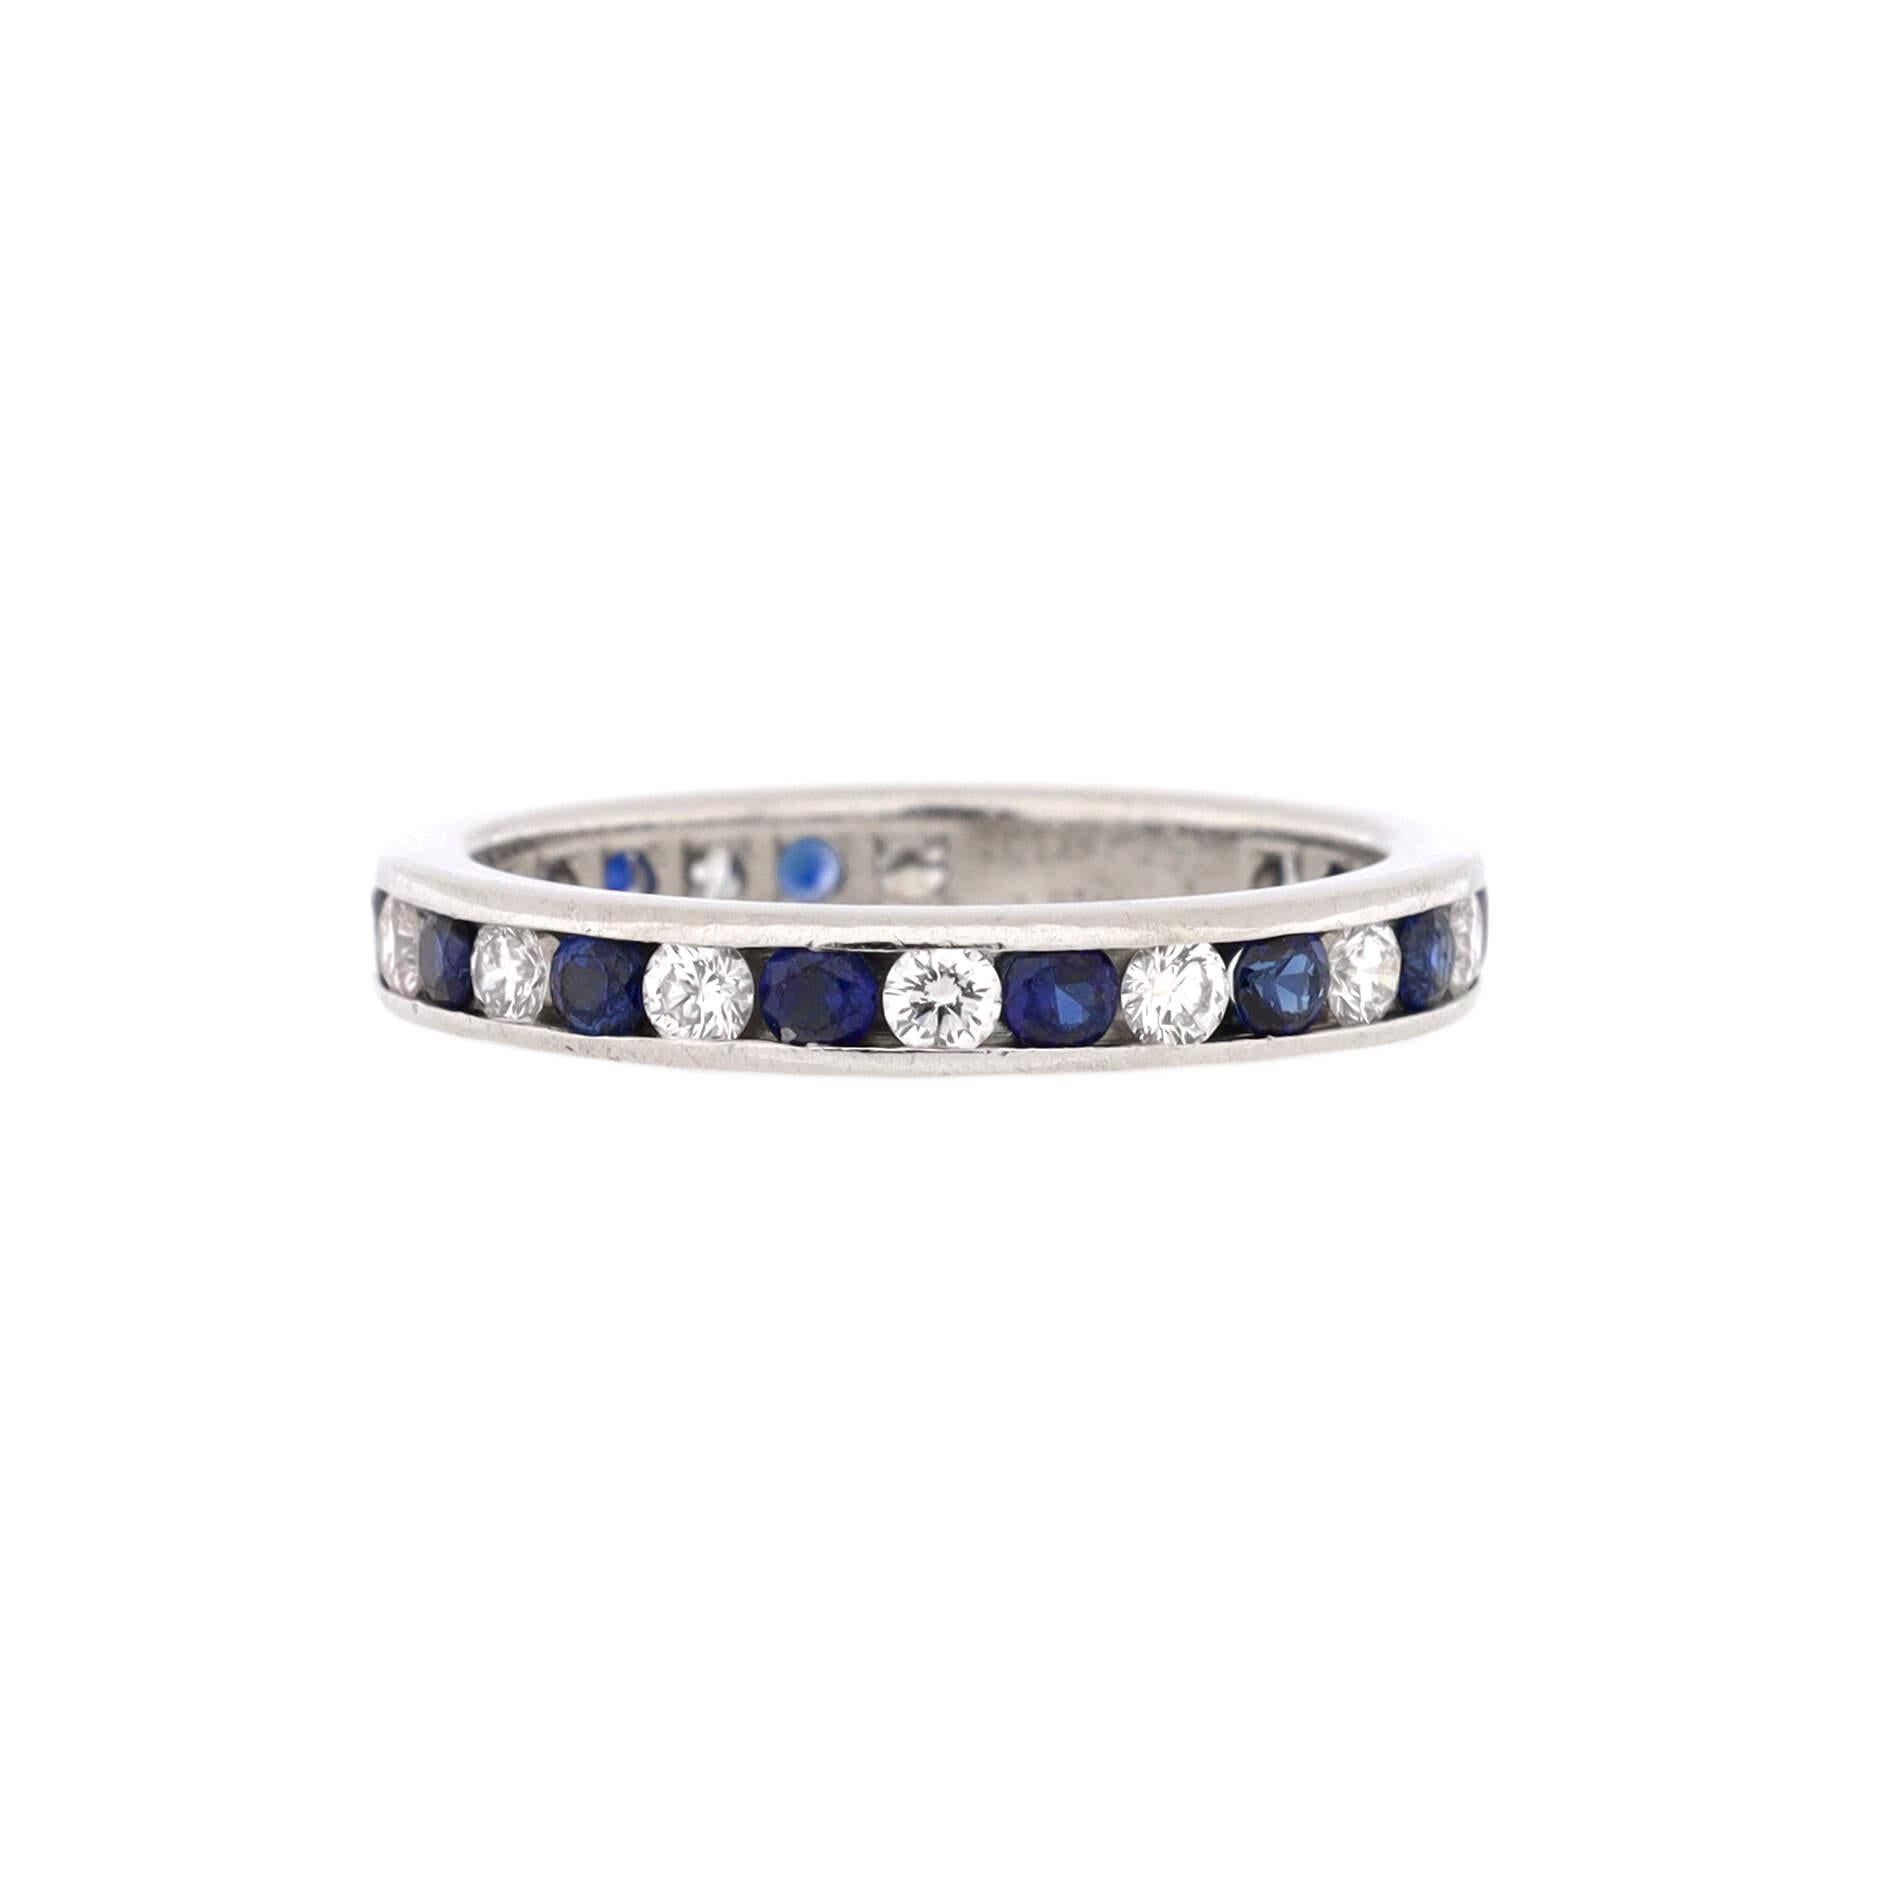 Condition: Fair. Heavy wear throughout with abrasions on the sapphires.
Accessories: No Accessories
Measurements: Size: 6, Width: 3.00 mm
Designer: Tiffany & Co.
Model: Full Eternity Wedding Band Ring Platinum with Diamonds and Blue Sapphires